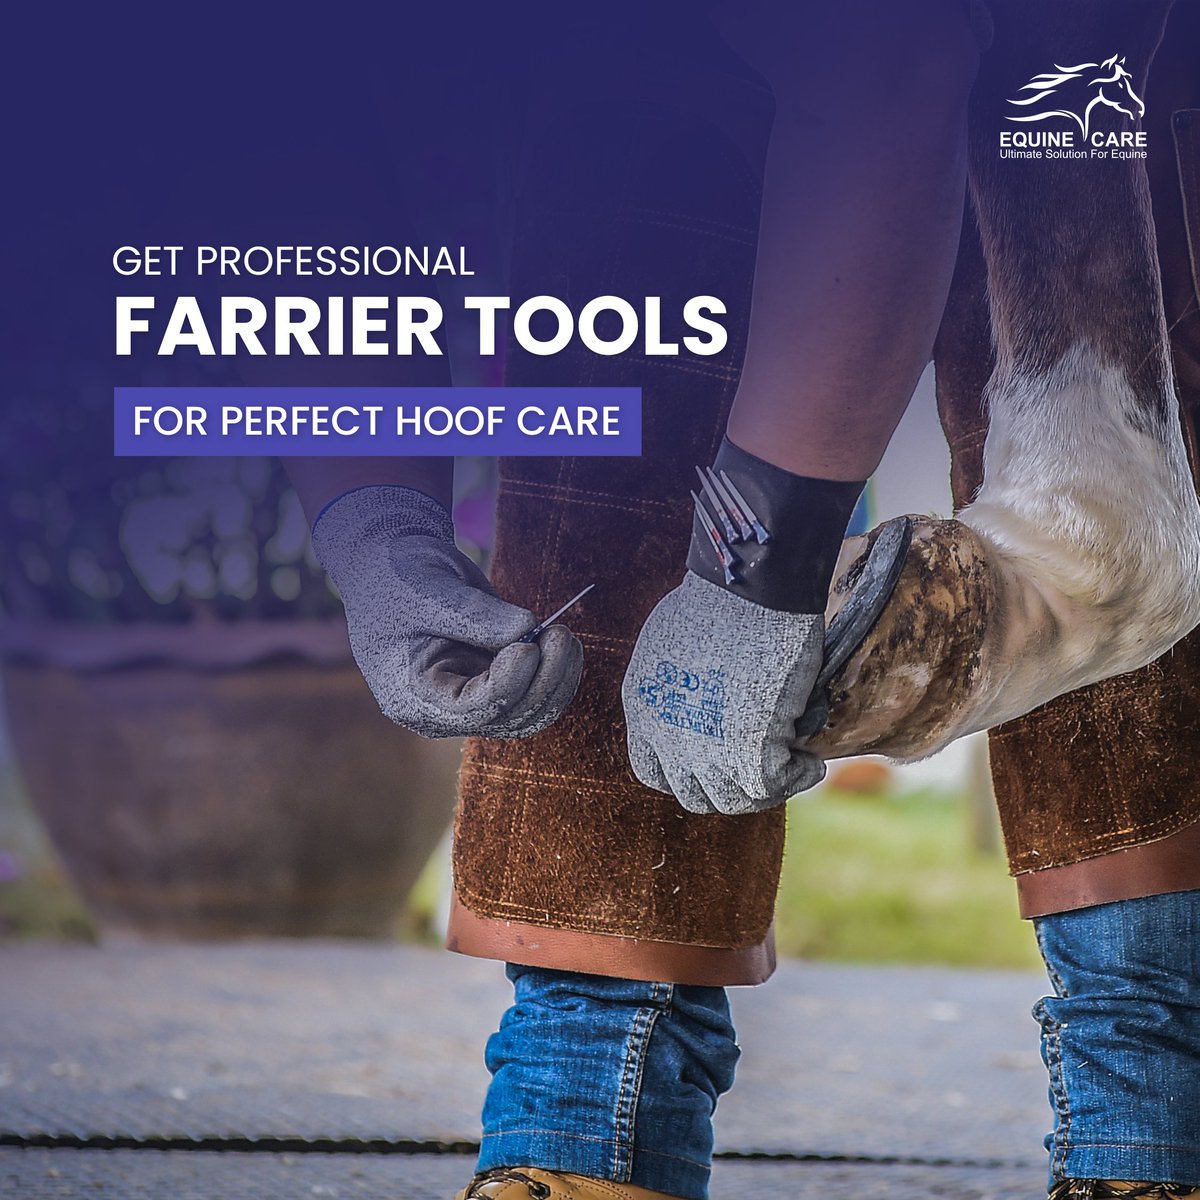 From hoof knives to nippers, our farrier tools mean business! Equine Care brings you the ultimate arsenal for impeccable hoof trimming and shoeing. Keep those hooves in top shape. 💯🔥

.
.
.
.

#FarrierTools #HoofCare #EquineHealth #HorseShoeing #ProfessionalFarrier